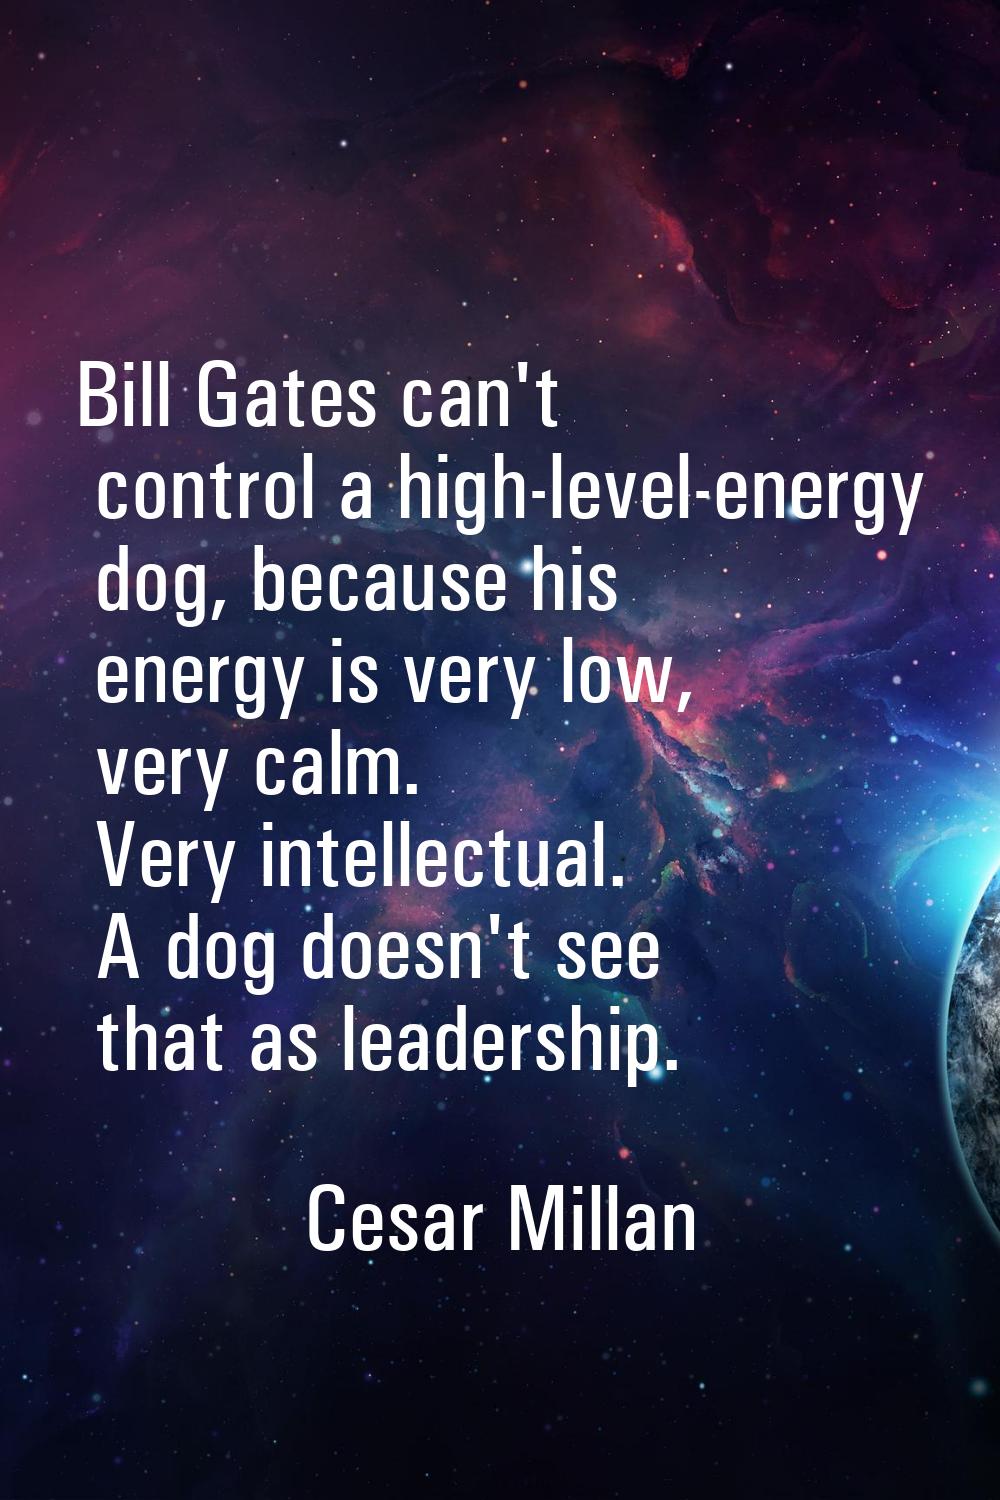 Bill Gates can't control a high-level-energy dog, because his energy is very low, very calm. Very i